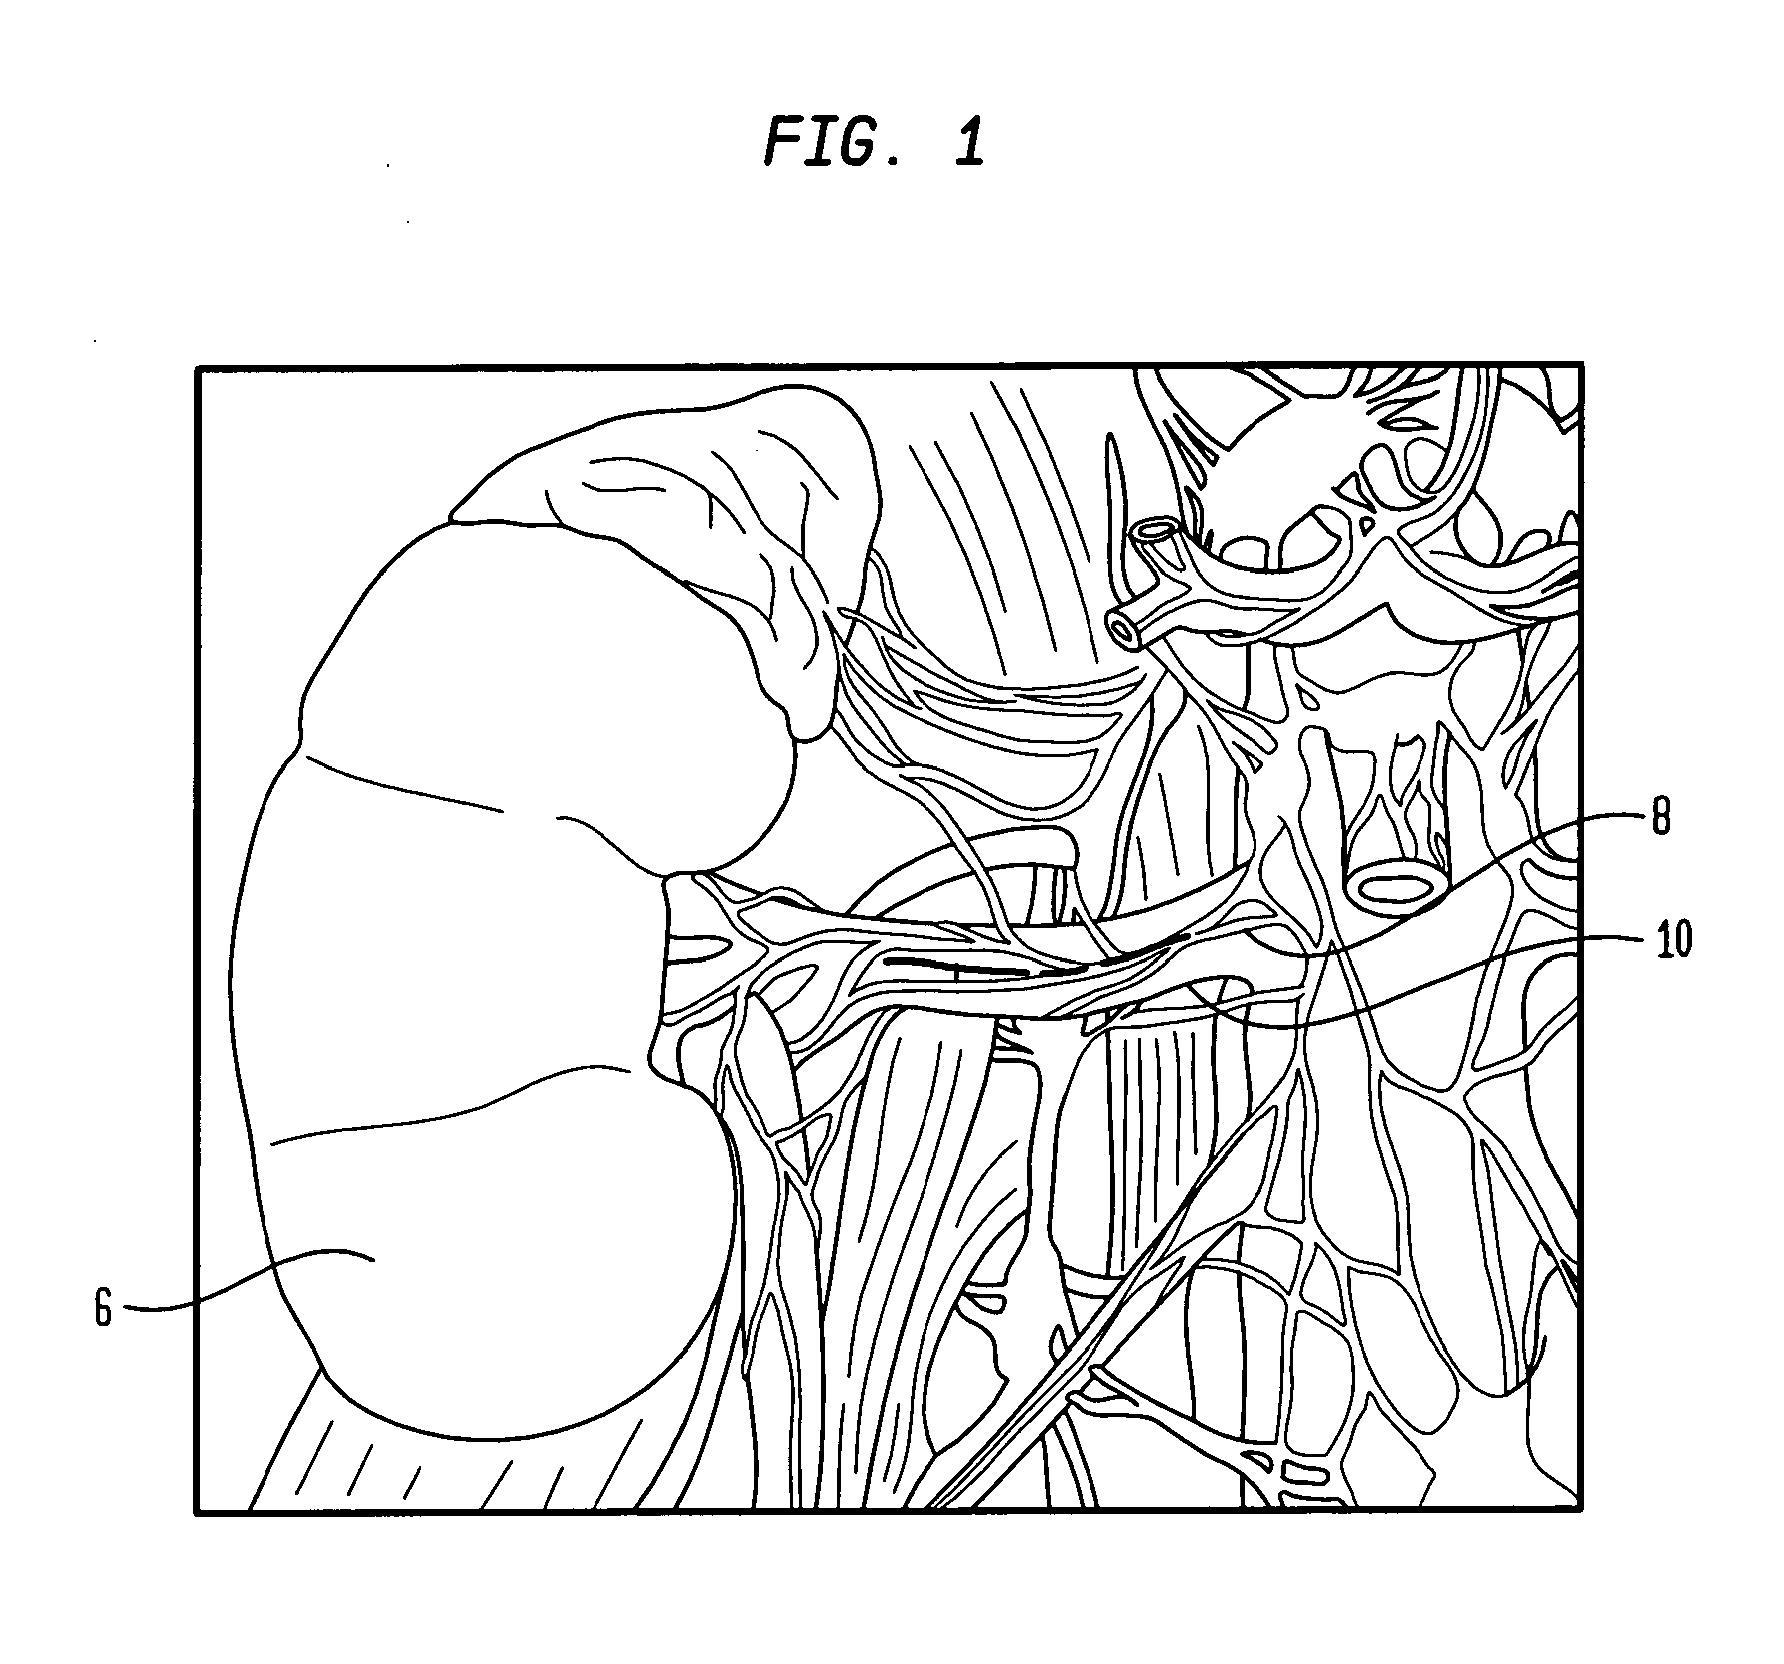 Method and apparatus for non-invasive treatment of hypertension through ultrasound renal denervation